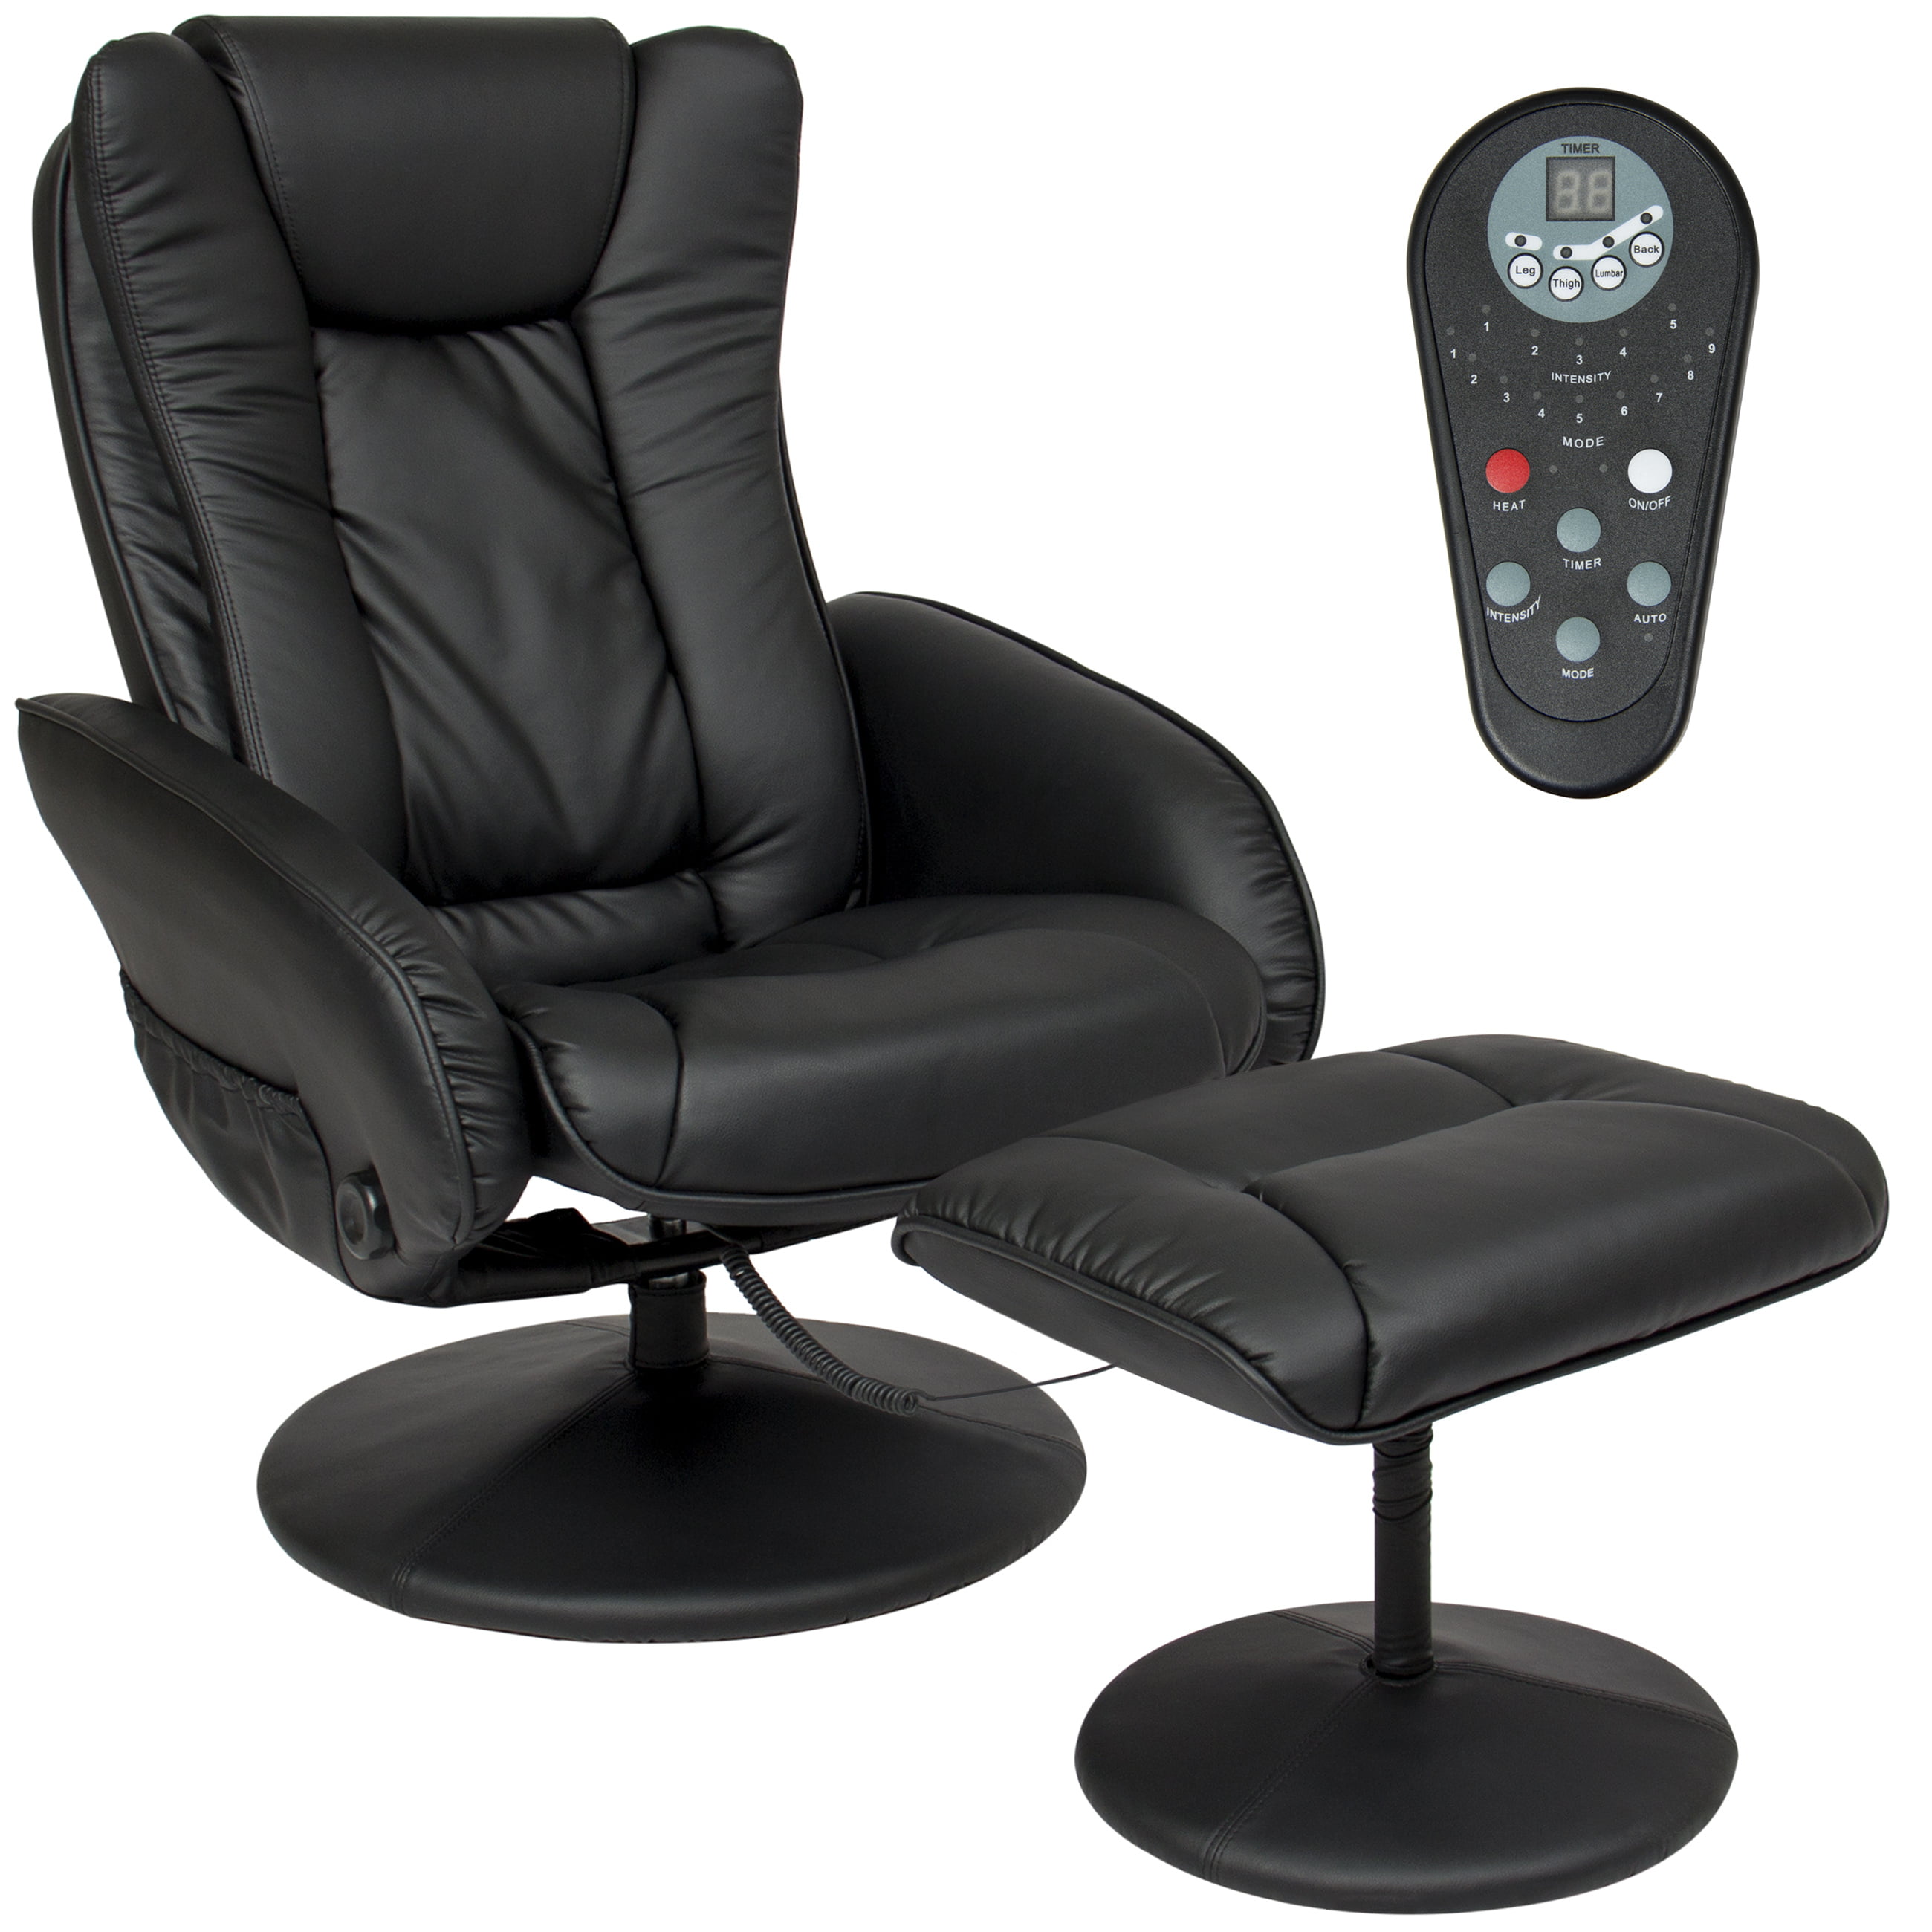 Leather Massage Recliner And Ottoman, Black Leather Massage Recliner